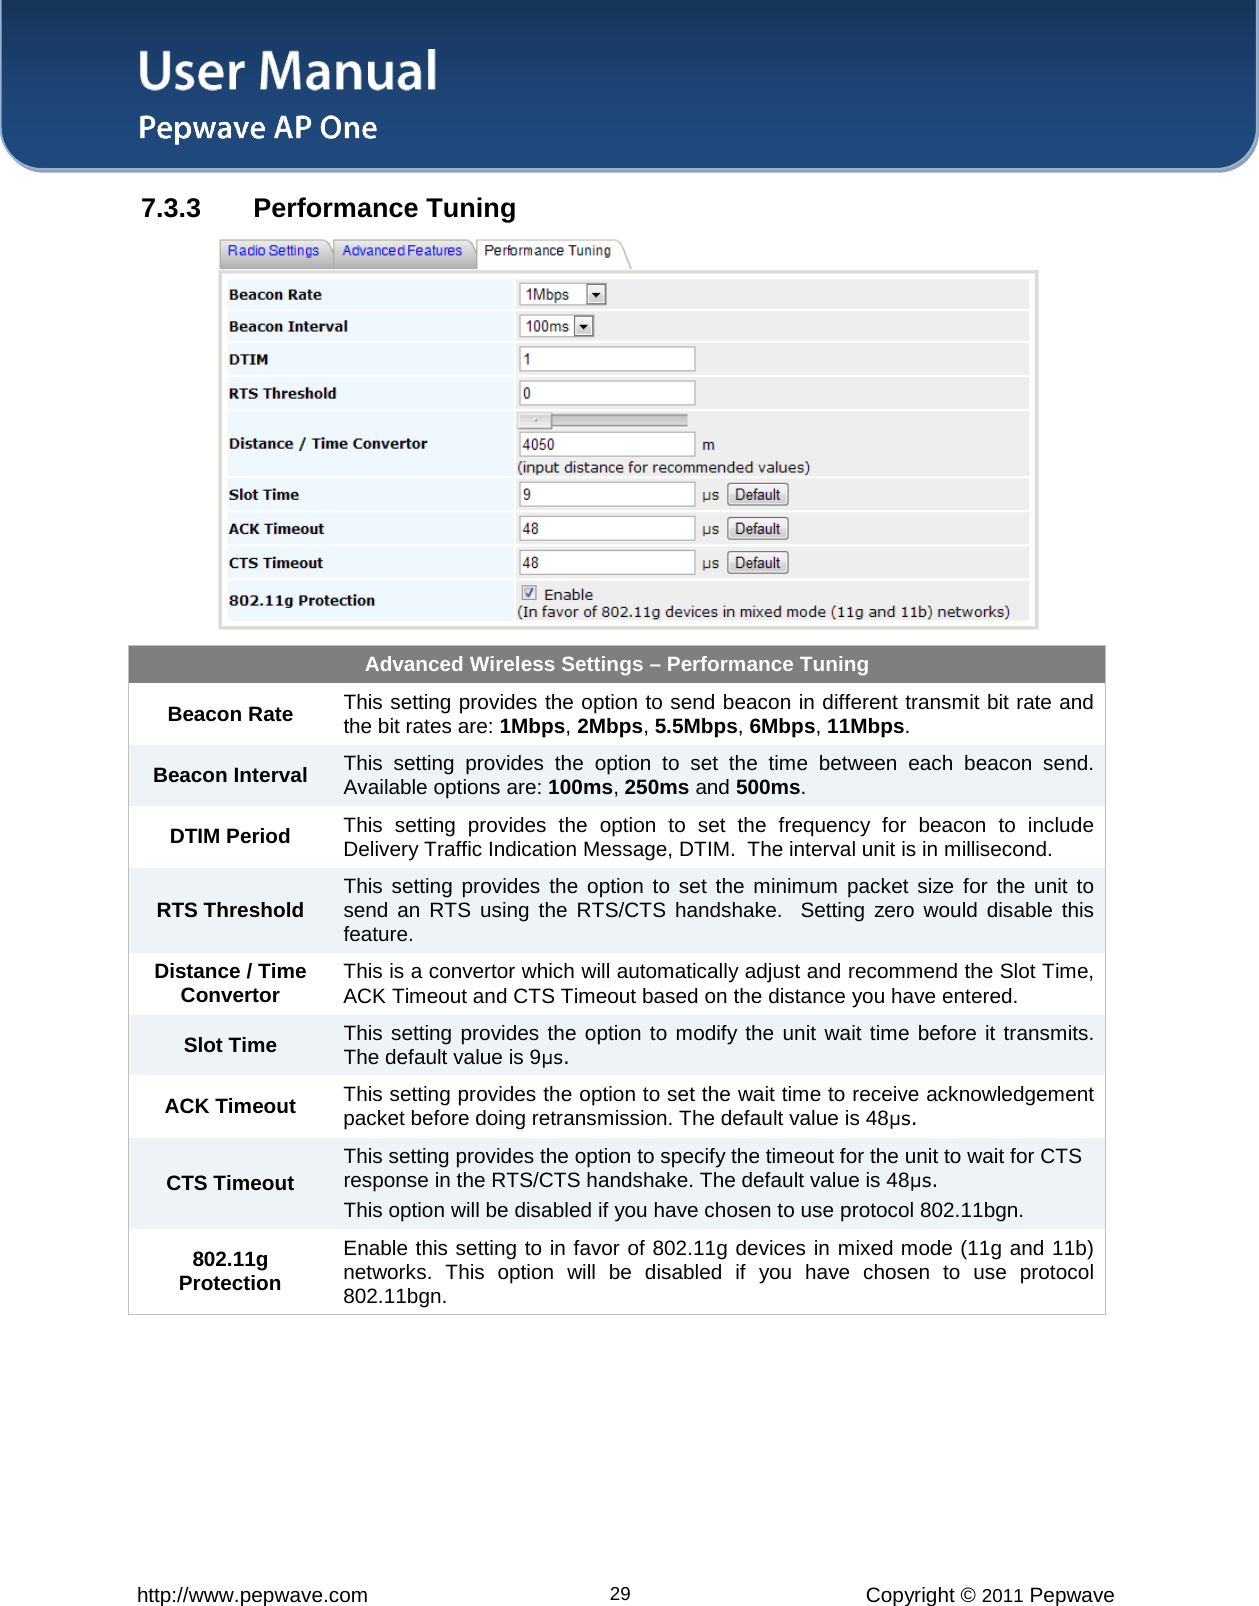 User Manual   http://www.pepwave.com 29 Copyright © 2011 Pepwave  7.3.3 Performance Tuning  Advanced Wireless Settings – Performance Tuning Beacon Rate This setting provides the option to send beacon in different transmit bit rate and the bit rates are: 1Mbps, 2Mbps, 5.5Mbps, 6Mbps, 11Mbps. Beacon Interval This setting provides the option to set the time between each beacon send. Available options are: 100ms, 250ms and 500ms. DTIM Period This setting provides the option to set the frequency for beacon to include Delivery Traffic Indication Message, DTIM.  The interval unit is in millisecond. RTS Threshold This setting provides the option to set the minimum packet size for the unit to send an RTS using the RTS/CTS handshake.  Setting zero would disable this feature. Distance / Time Convertor This is a convertor which will automatically adjust and recommend the Slot Time, ACK Timeout and CTS Timeout based on the distance you have entered.  Slot Time This setting provides the option to modify the unit wait time before it transmits. The default value is 9μs. ACK Timeout This setting provides the option to set the wait time to receive acknowledgement packet before doing retransmission. The default value is 48μs. CTS Timeout This setting provides the option to specify the timeout for the unit to wait for CTS response in the RTS/CTS handshake. The default value is 48μs. This option will be disabled if you have chosen to use protocol 802.11bgn. 802.11g Protection Enable this setting to in favor of 802.11g devices in mixed mode (11g and 11b) networks. This option will be disabled if you have chosen to use protocol 802.11bgn. 